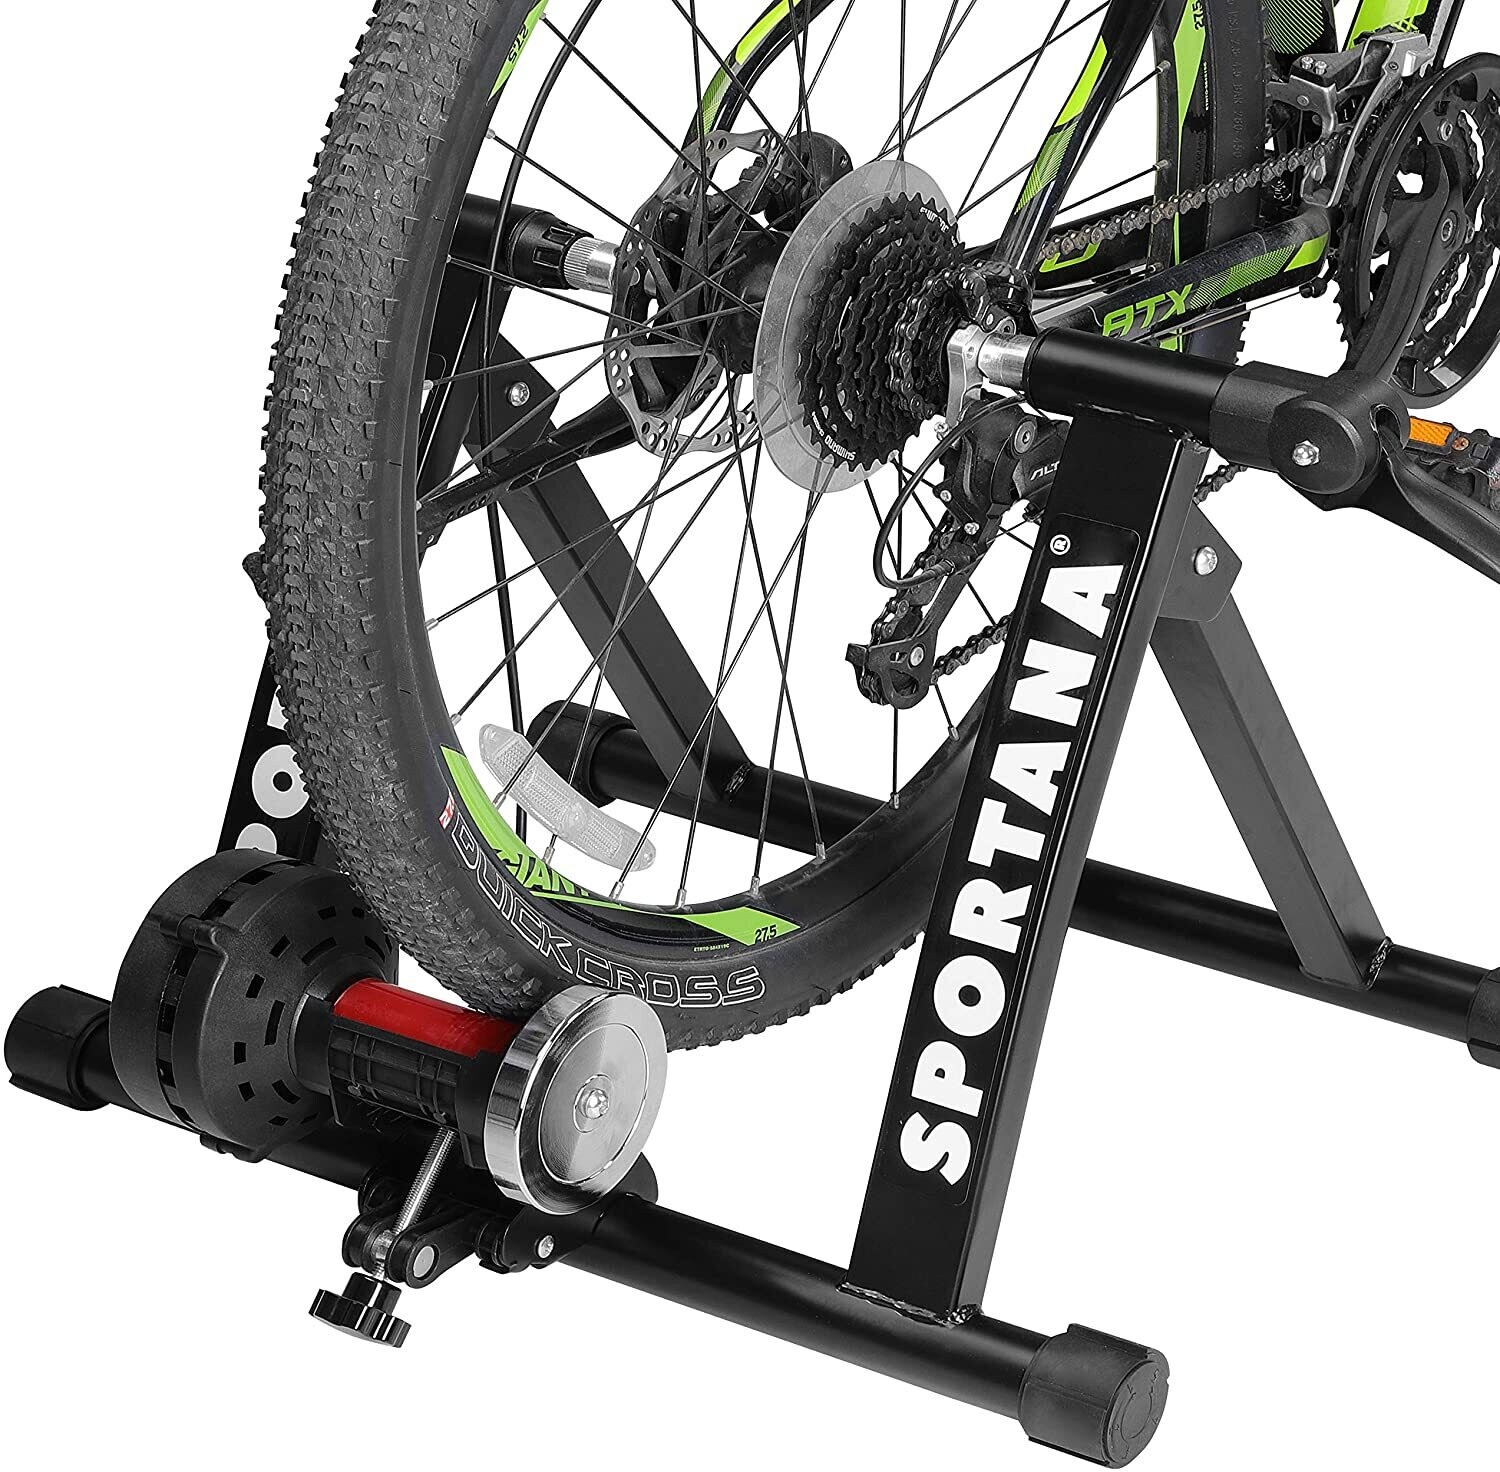 Roller Trainer for Indoor Cycling 6 Resistance Levels